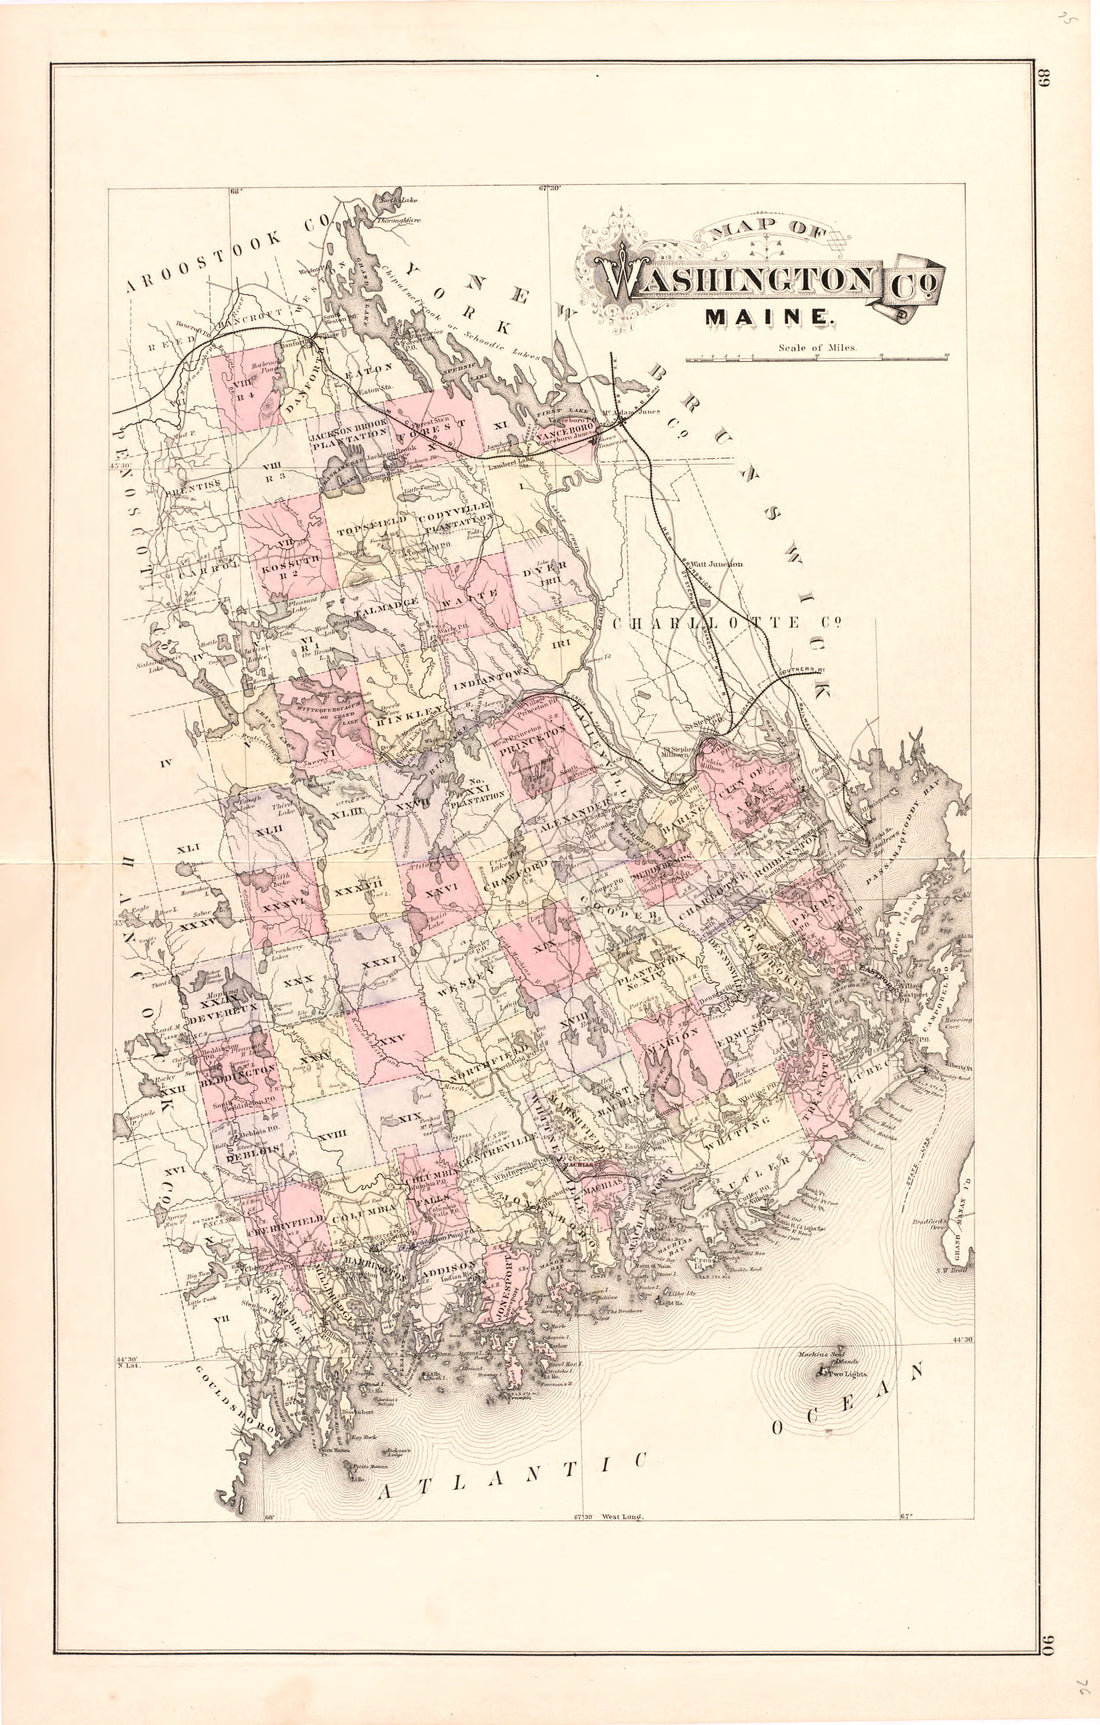 This hand drawn illustration (map) of Map of Washington Co. Maine from Colby&